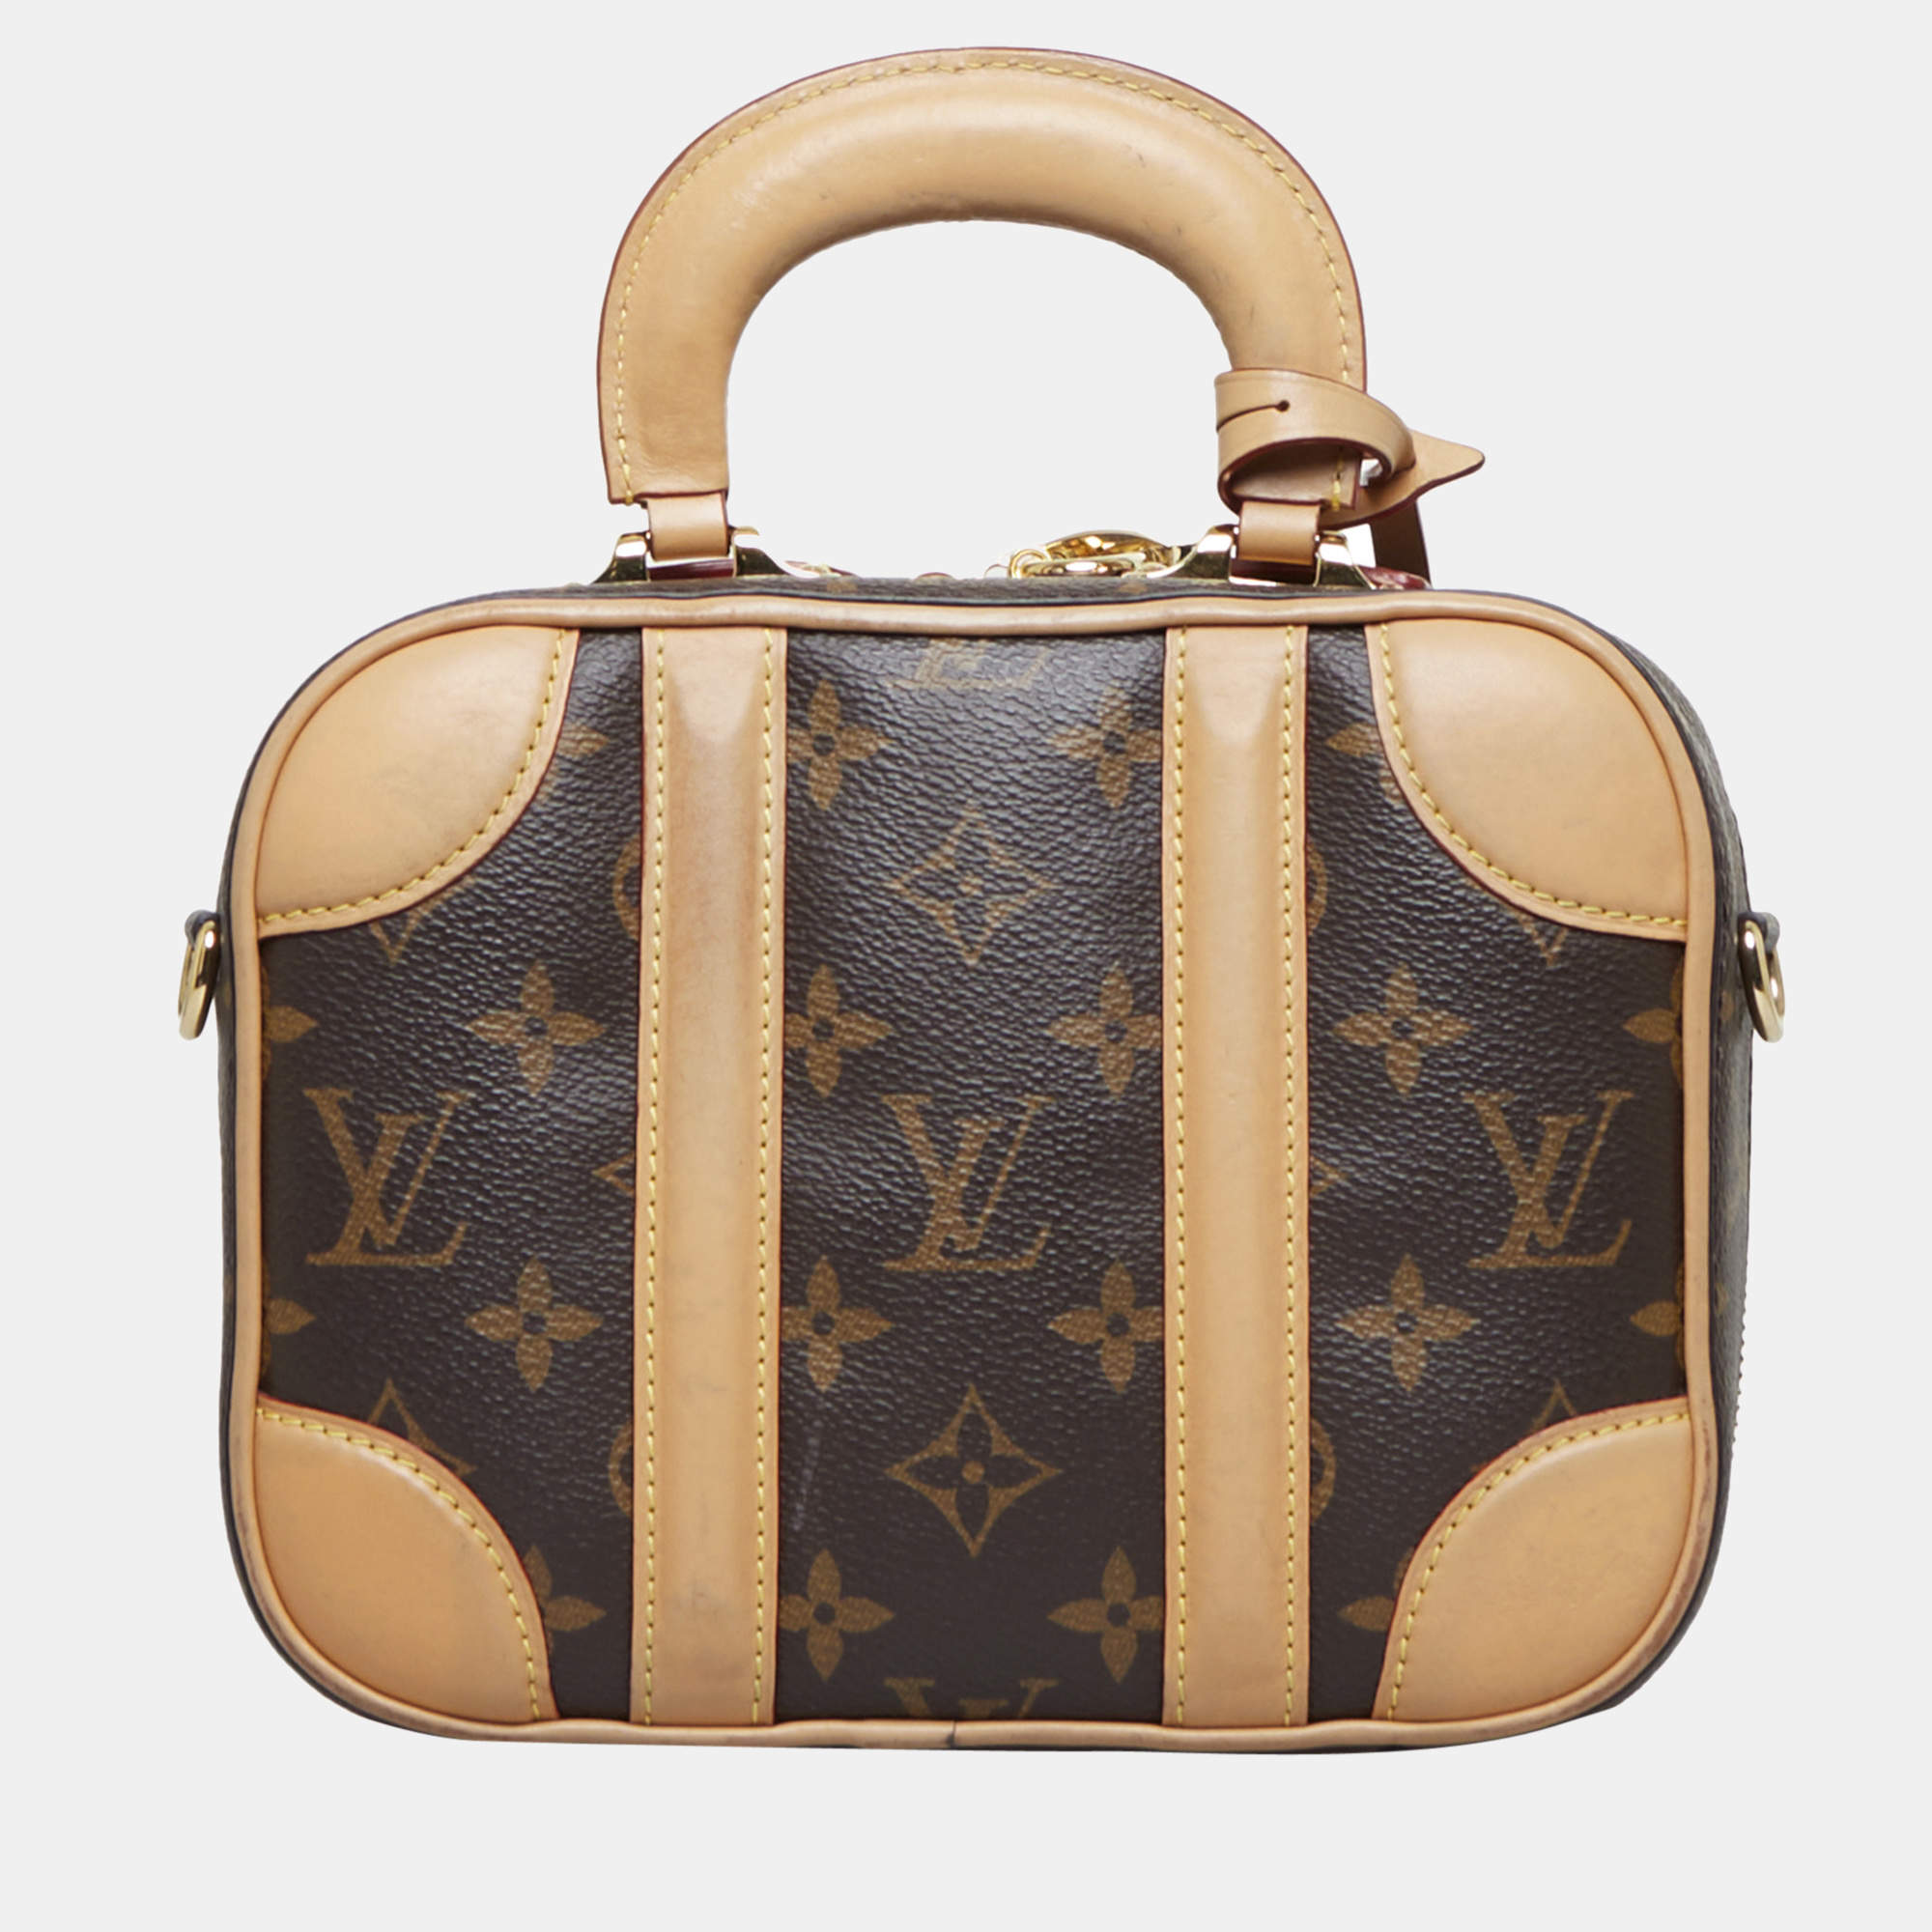 Lv mini luggage  Luxury bags, Bags, Leather backpack